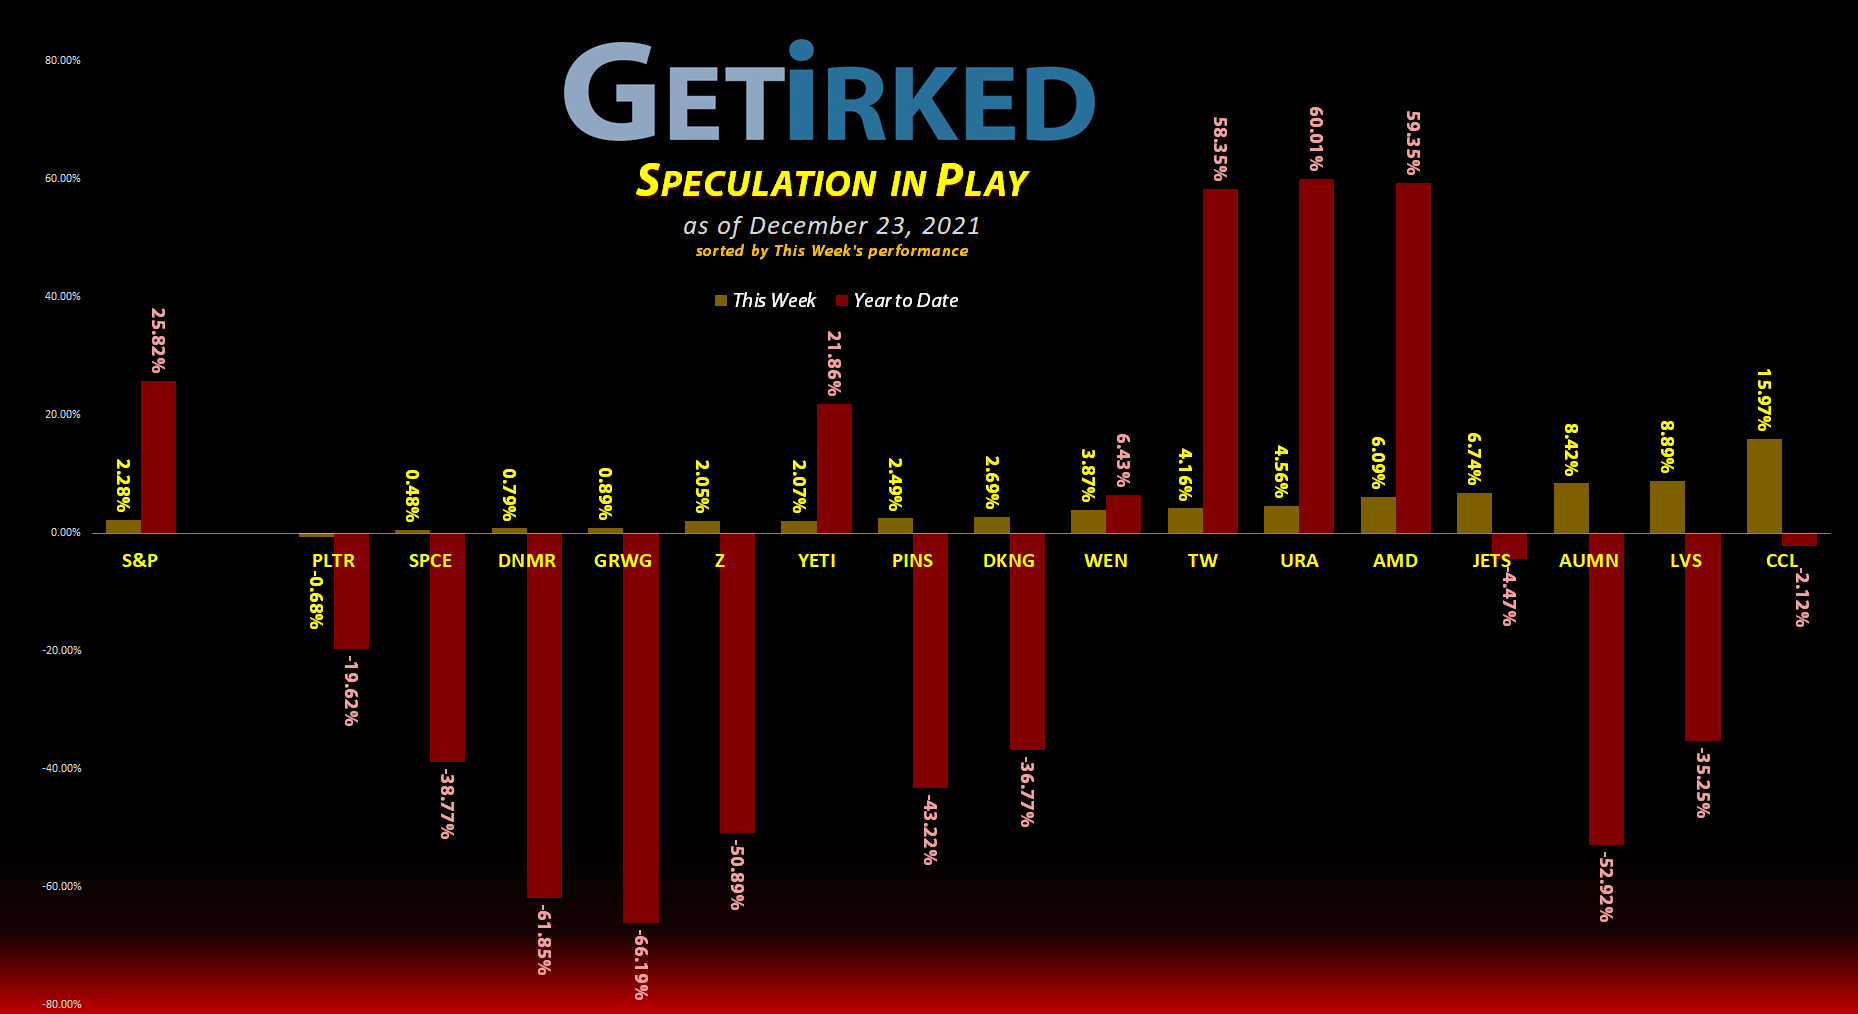 Get Irked's Speculation in Play - December 23, 2021